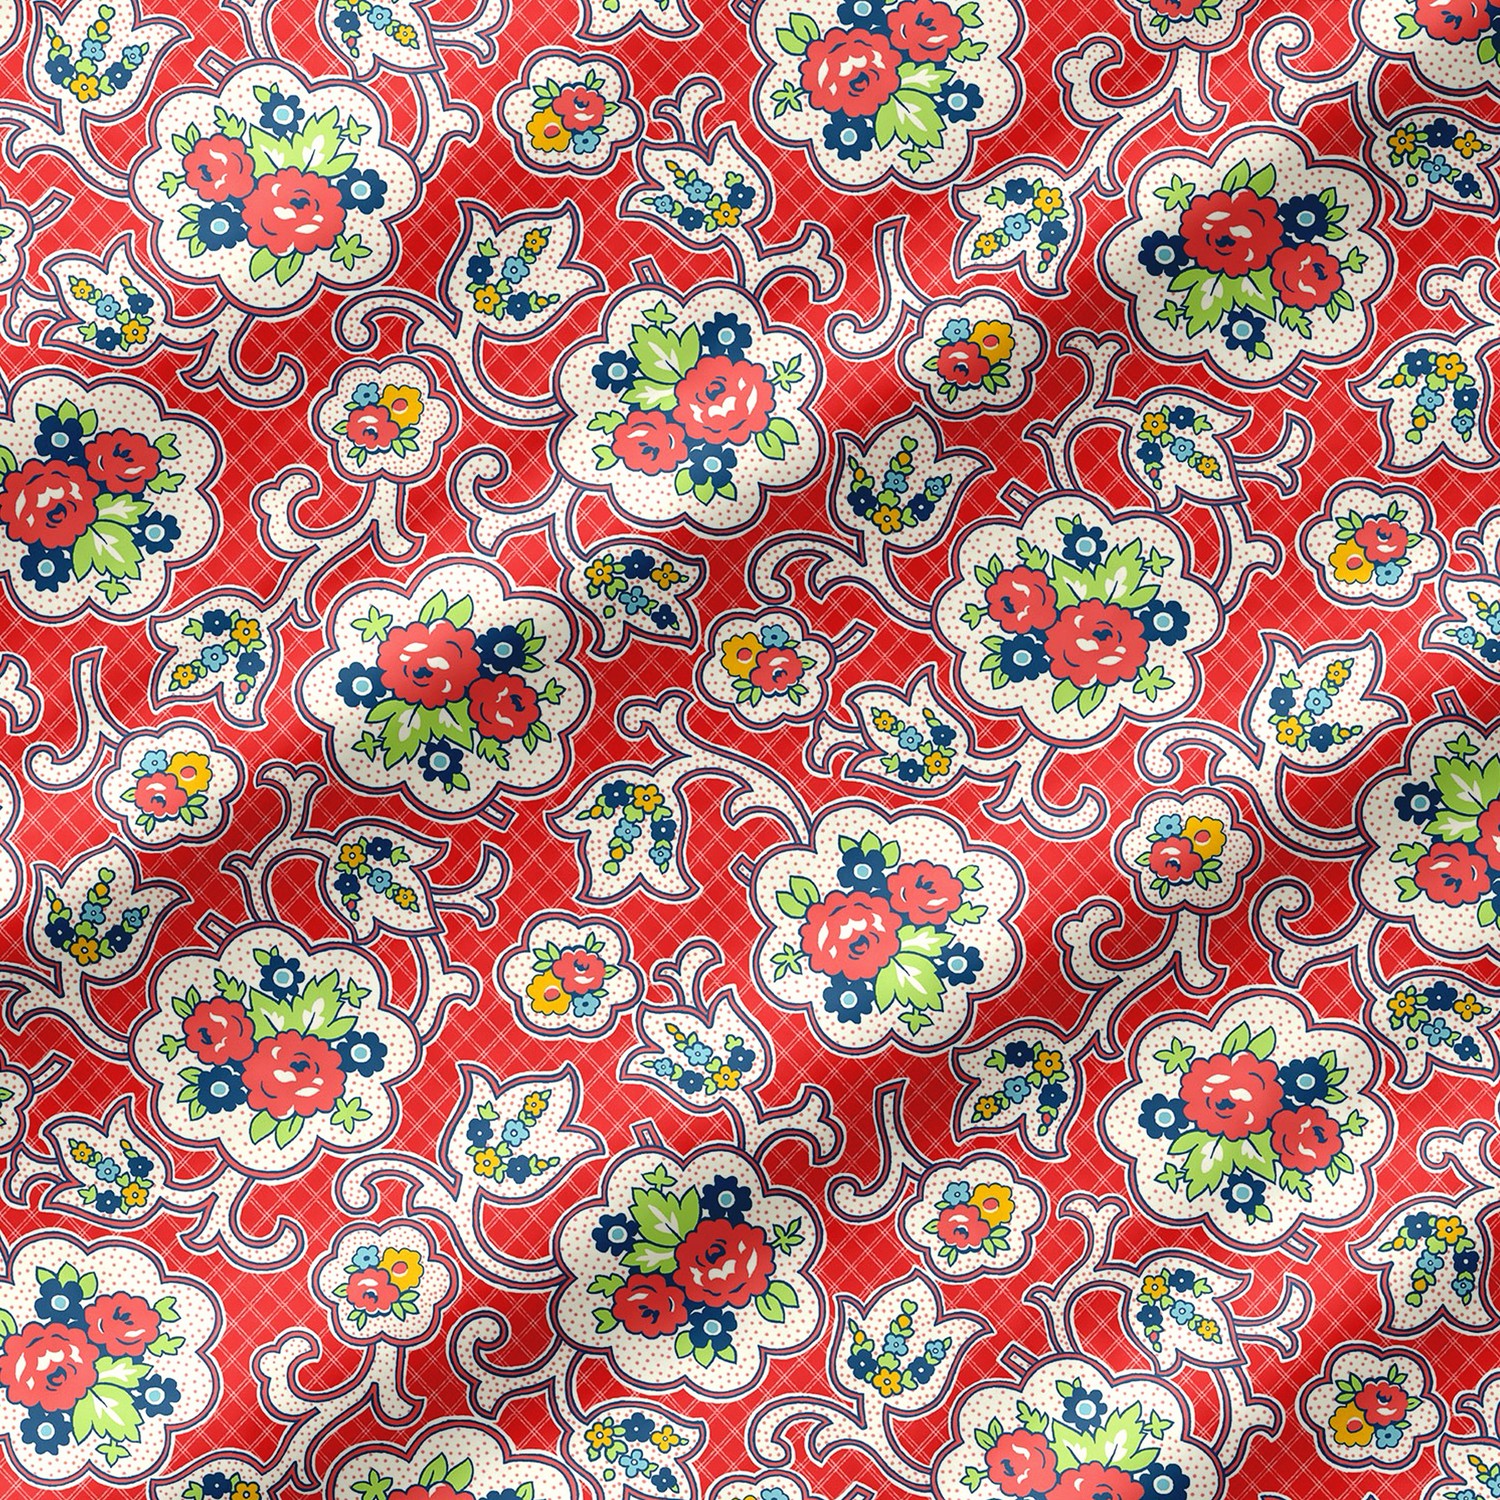 Specialty Cuts Floral Paisley 1 Yard Cut Blaze Red Multi Color Quilting  Cotton Fabric